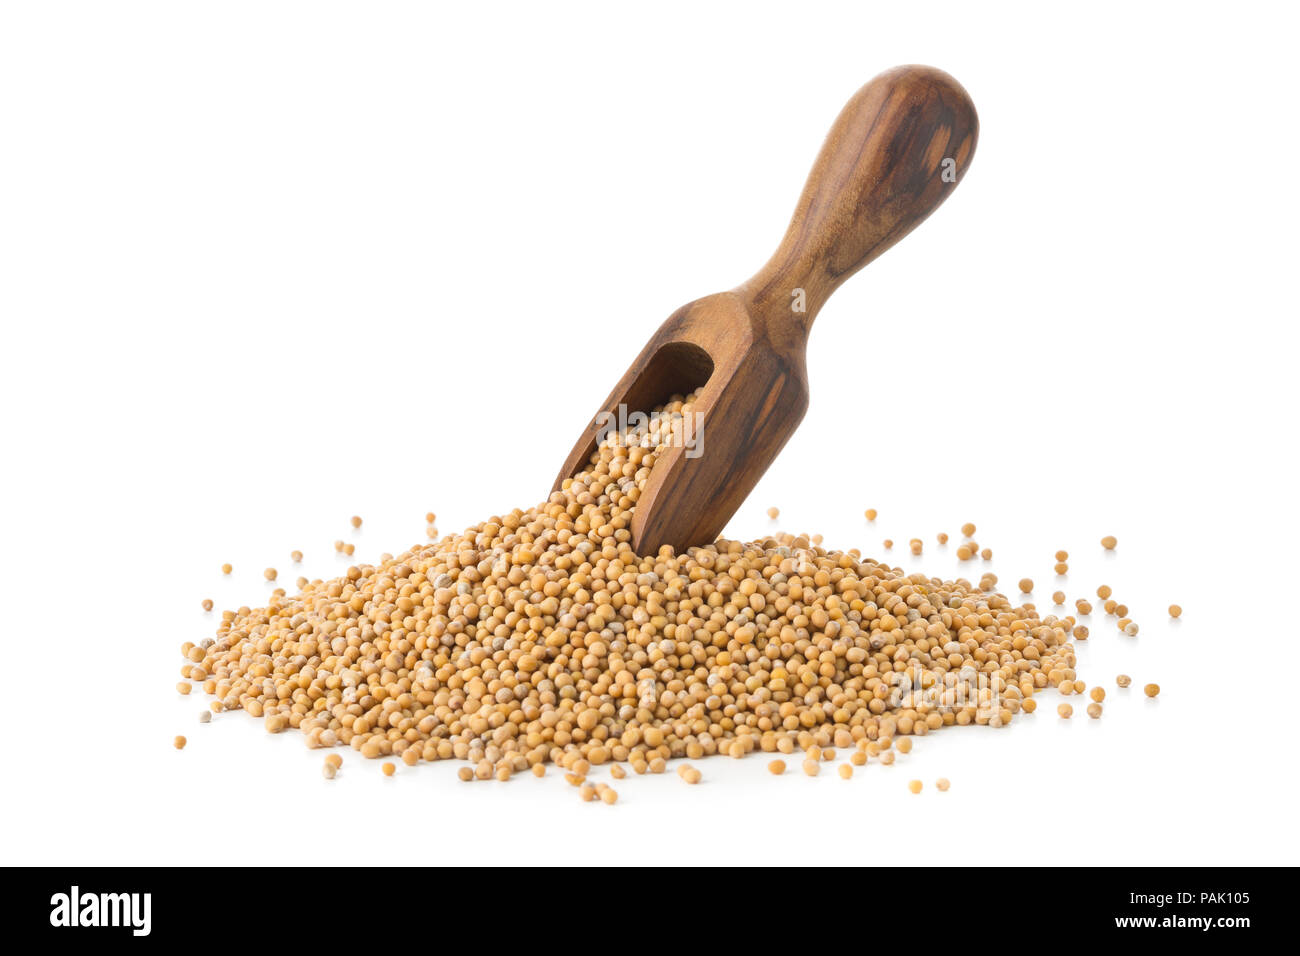 Heap of raw, unprocessed mustard seed kernels with wooden scoop on white background Stock Photo